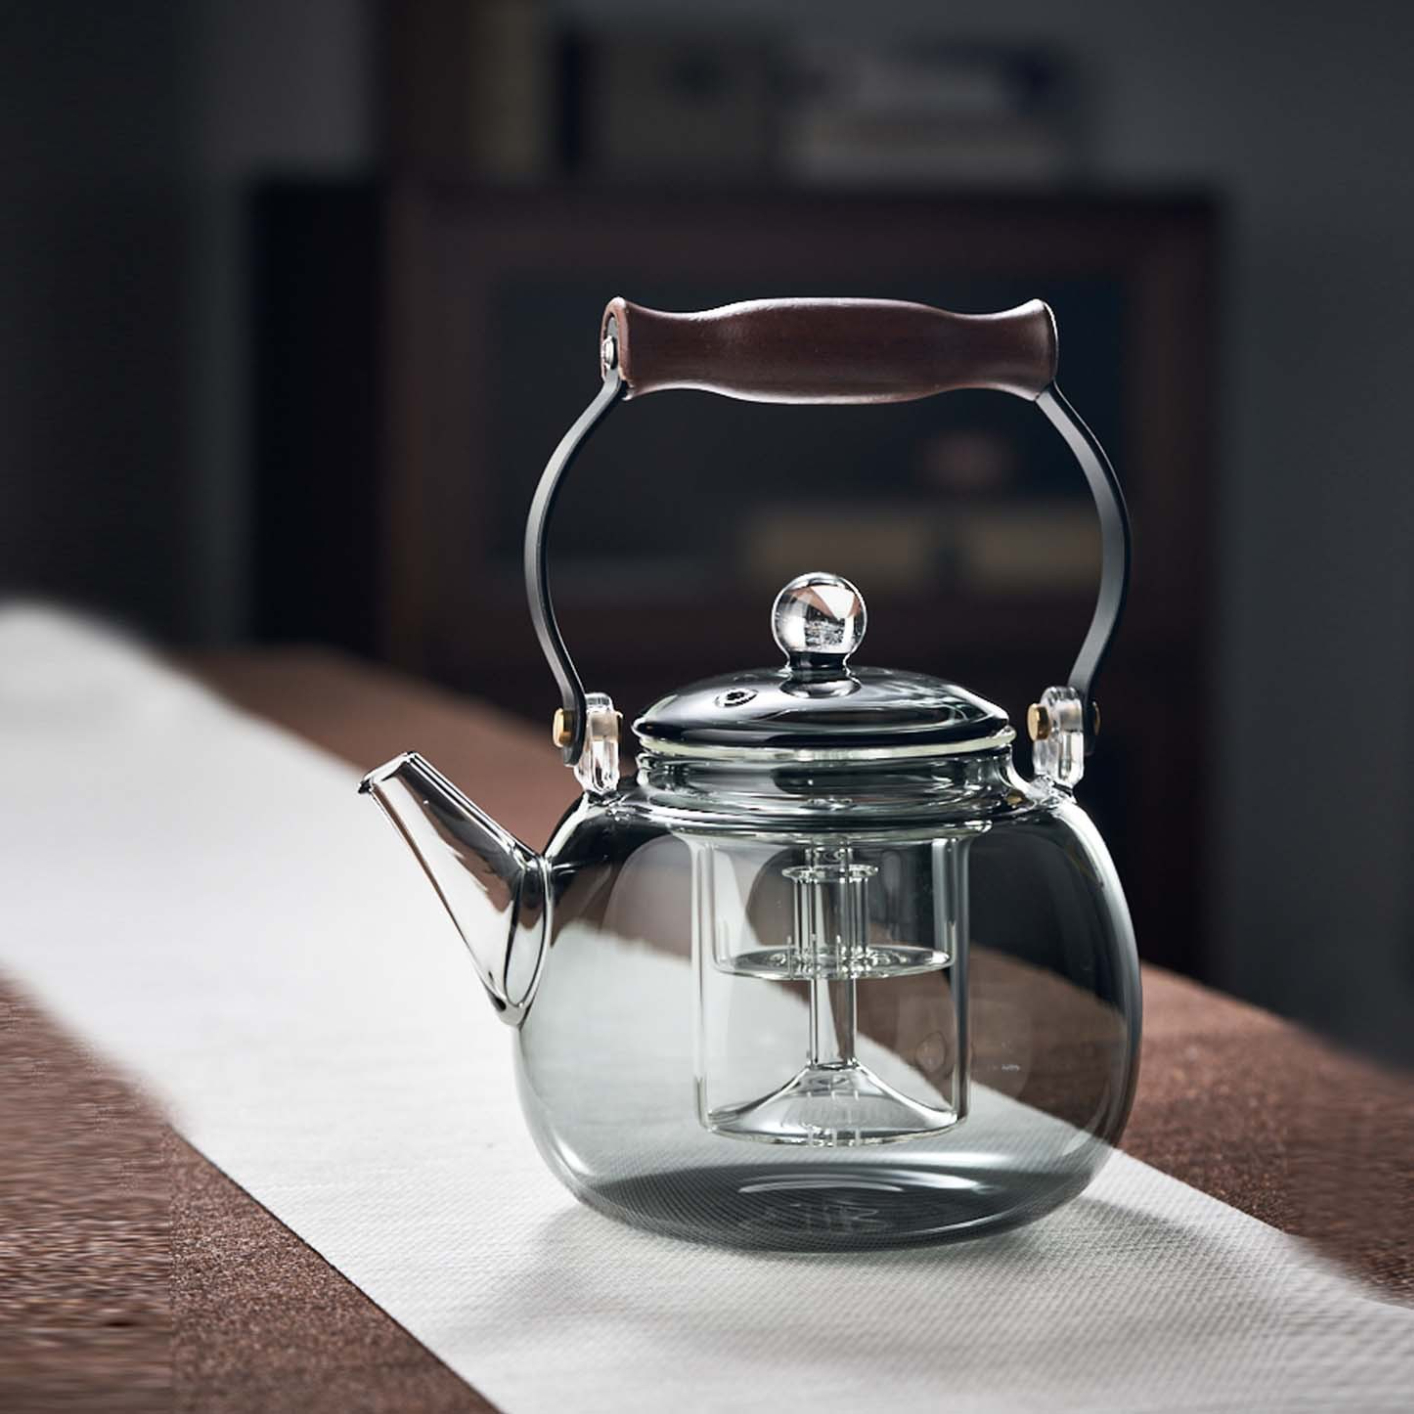 Grey 800ml Glass Teapot Kettle With Glass Infuser, Teapot With Strainer For Loose Tea, Safe On Stovetop, Tea Pot With Bamboo Handle